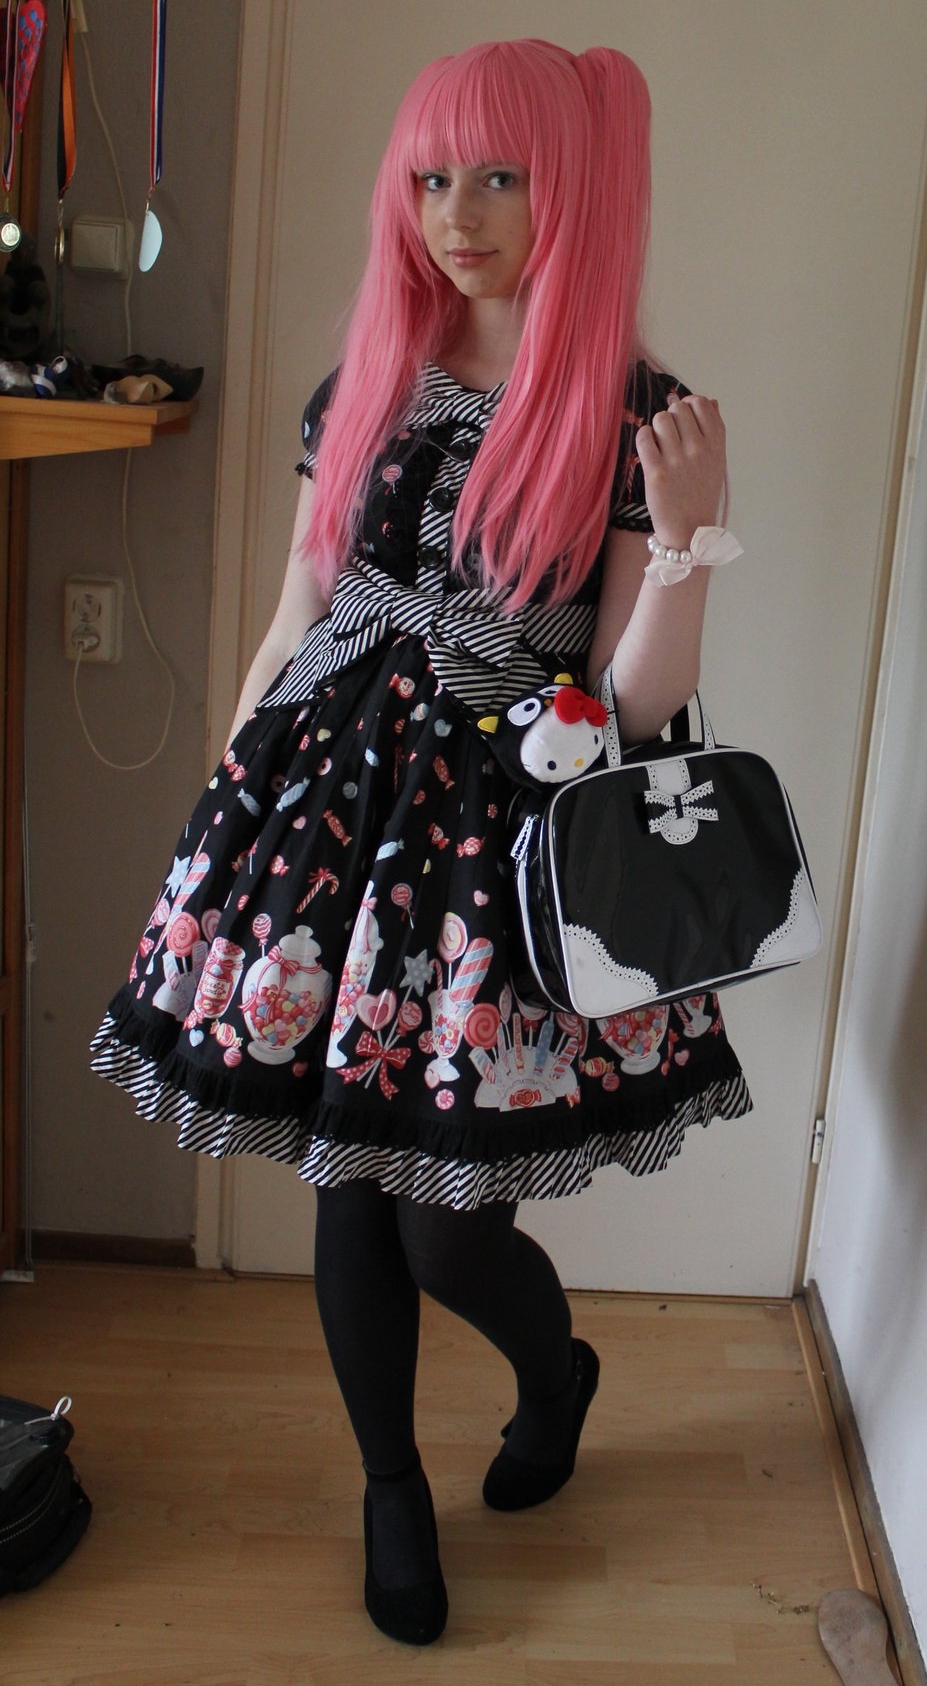 Lolita with Pink Hair wearing Black Opaque Pantyhose and Black Ballerinas